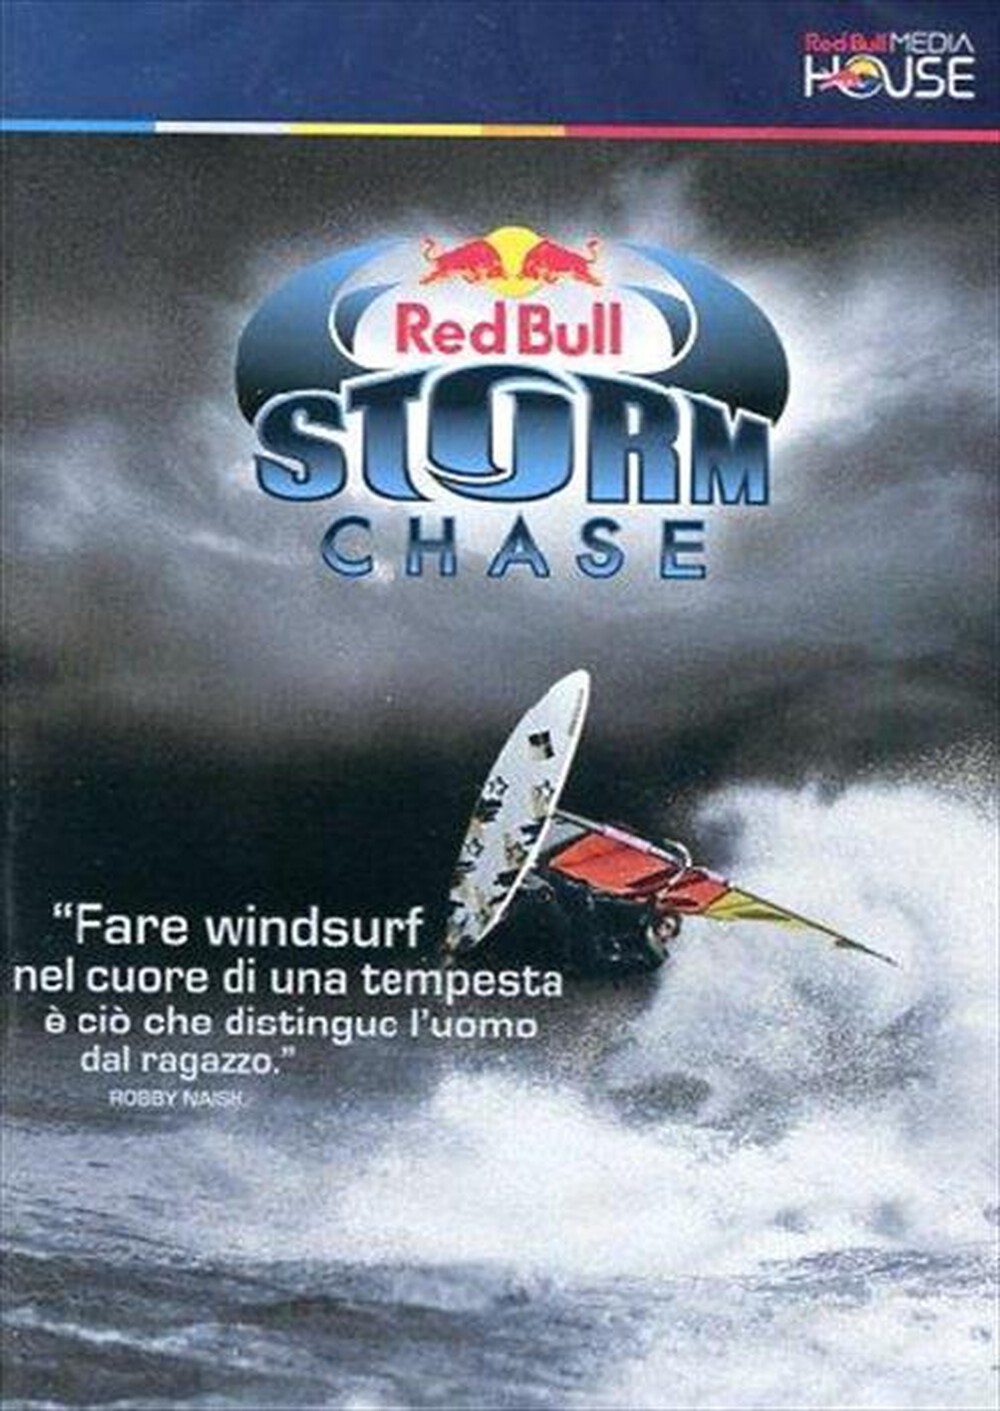 "RED BULL - Storm Chase"